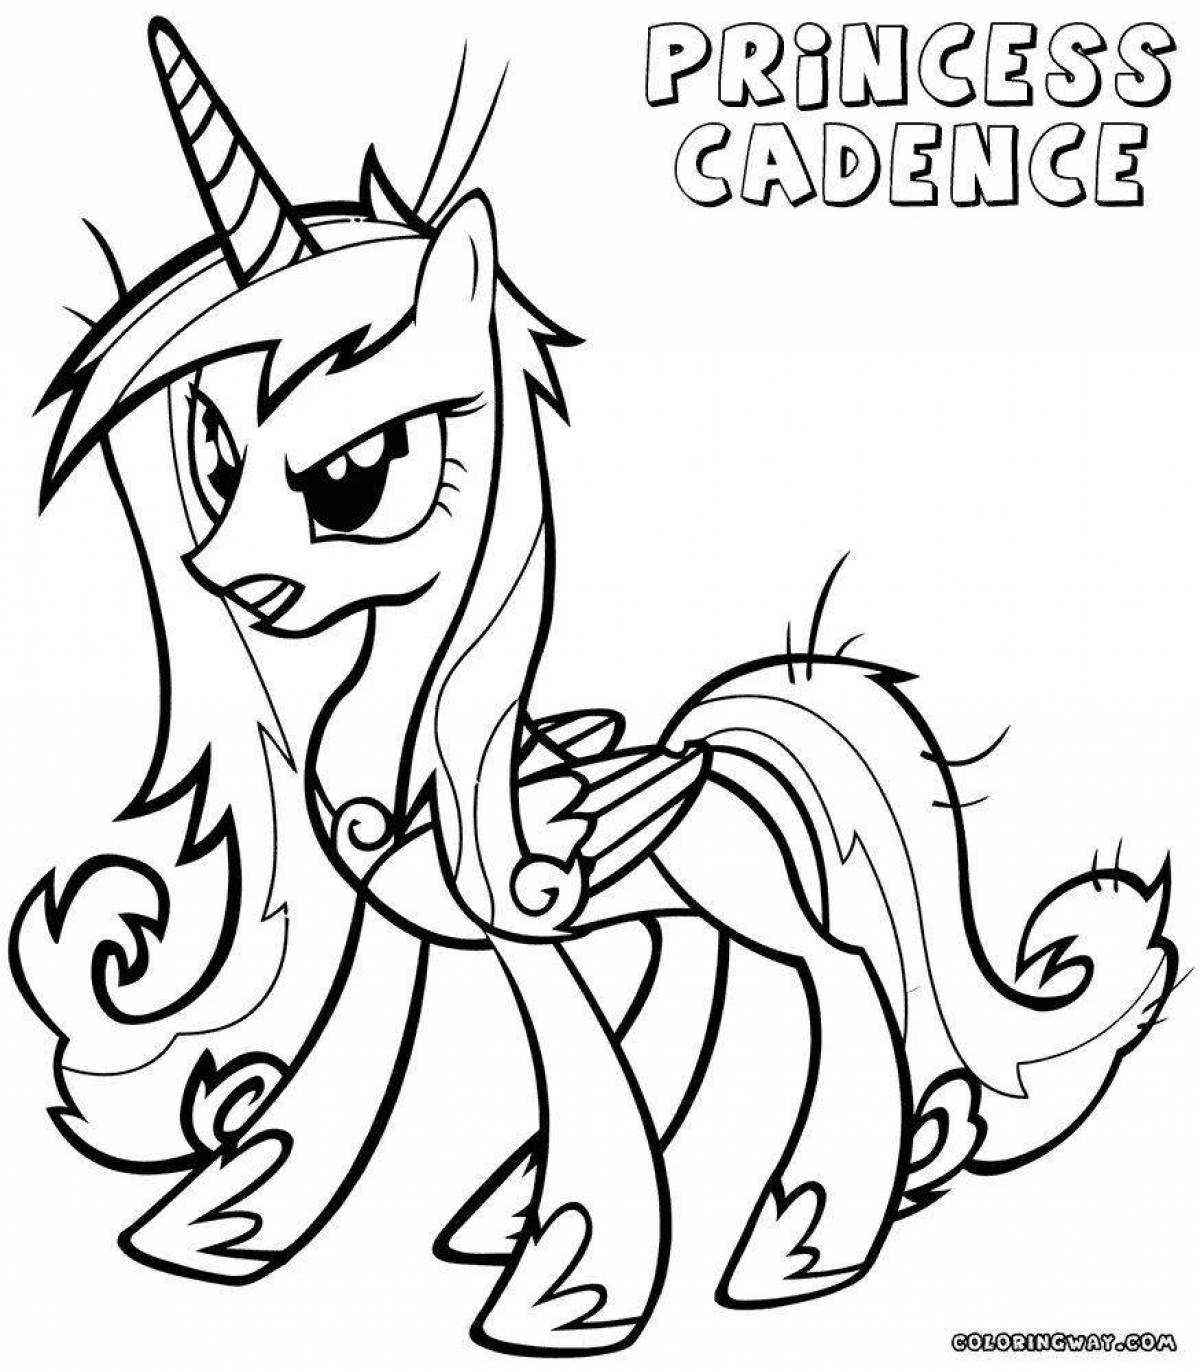 Jovial cadence pony coloring page